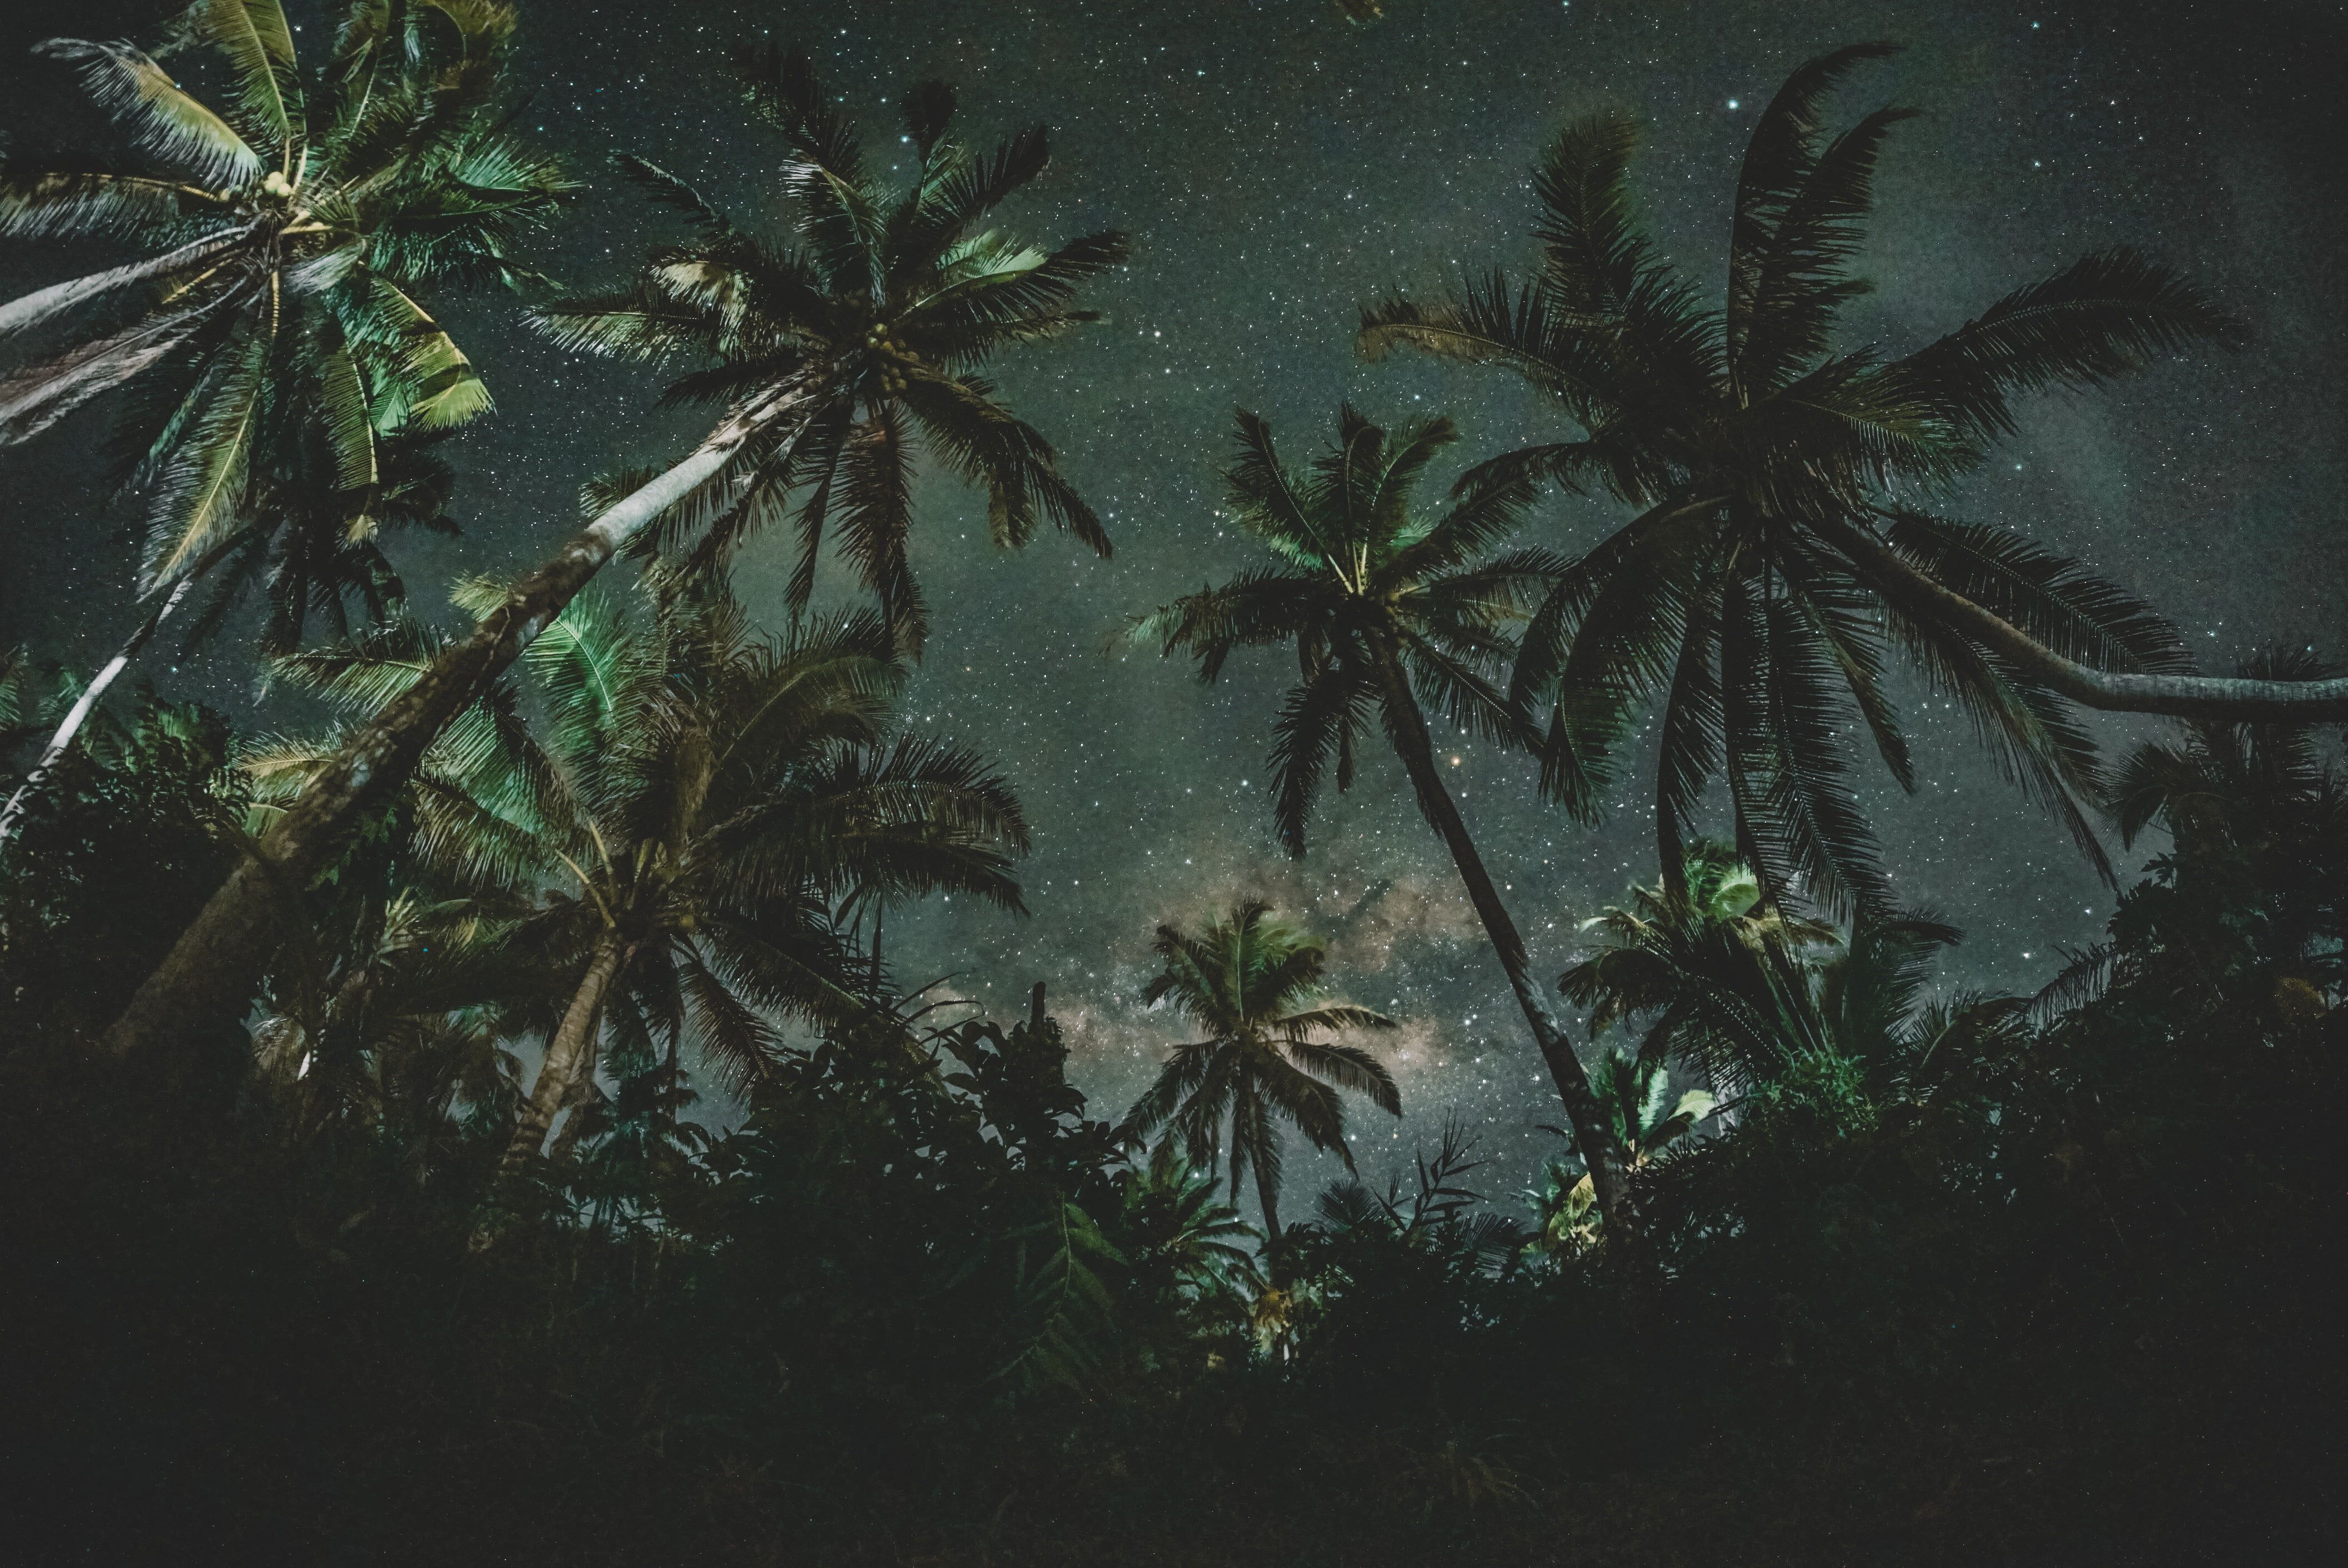 HD Wallpaper Coconut Trees Nature Starry Night Palm